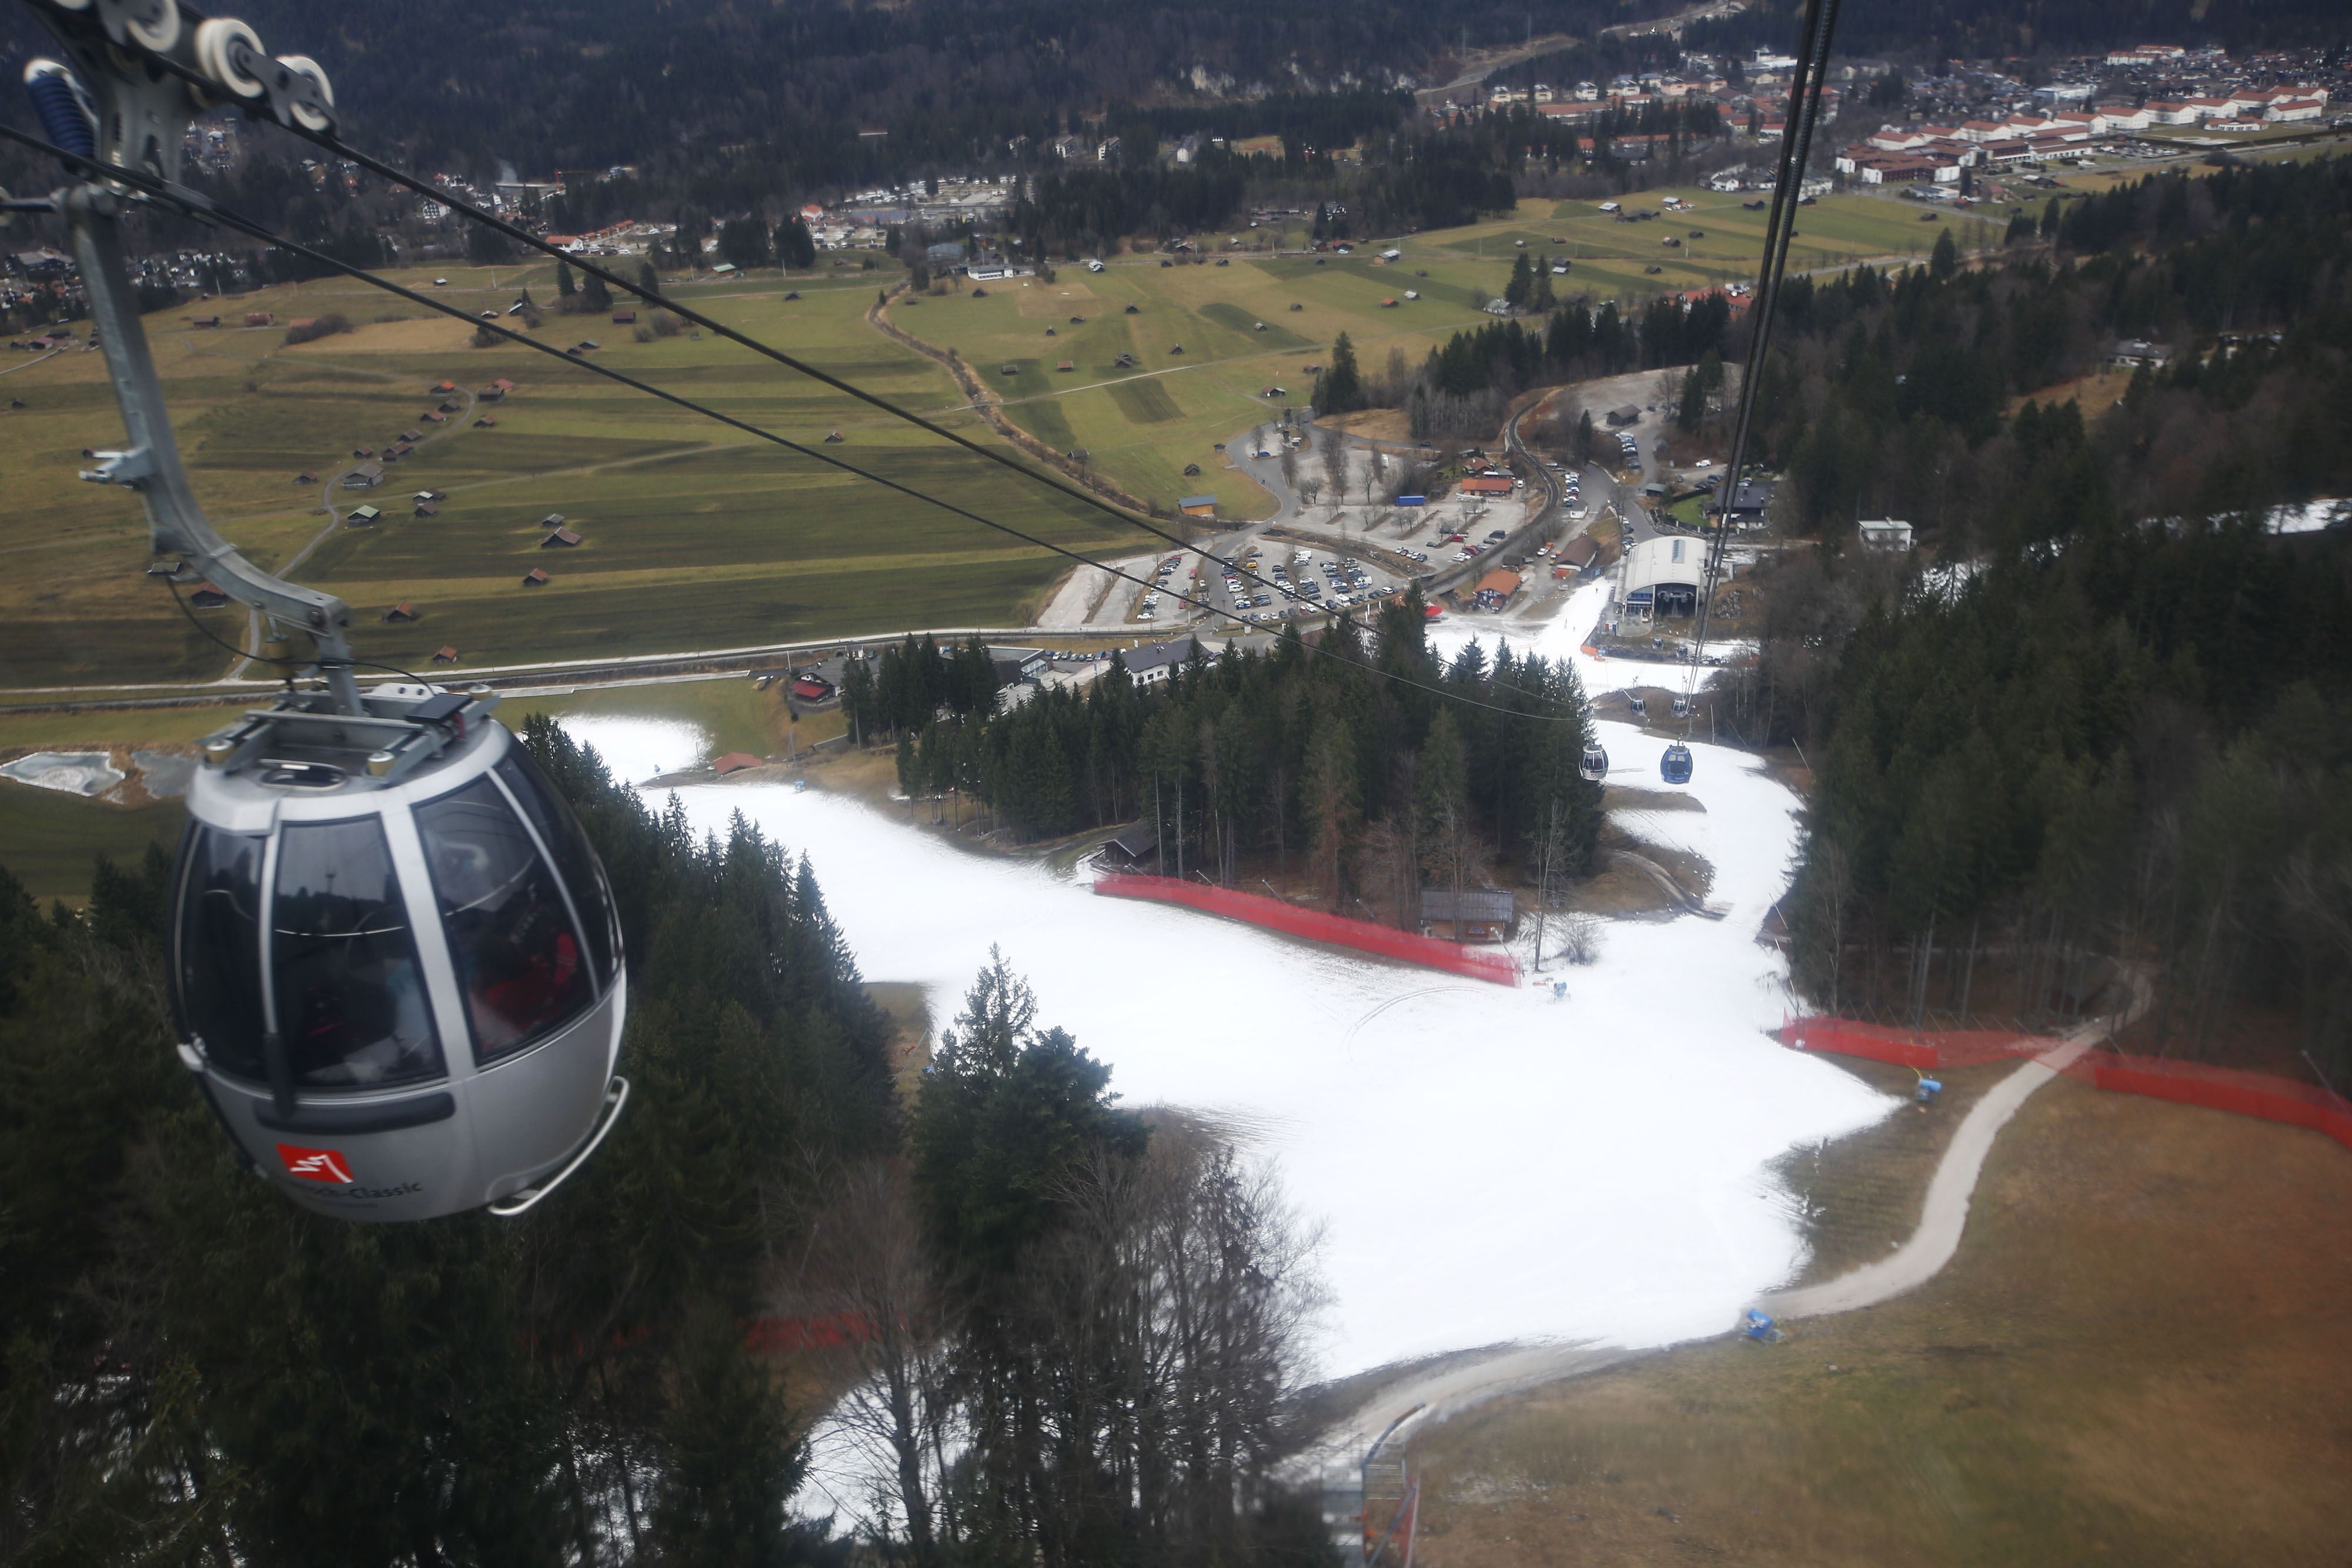 Cable car cabins travel over artificial snow on a ski slope at the Alpine skiing resort in Garmisch-Partenkirchen, Germany, on Jan. 8, 2020. Like other resorts at relatively low altitude, global warming has left its mark on Garmisch-Partenkirchen — the site of the 1936 Winter Olympics—putting the town’s identity and affluence at risk.